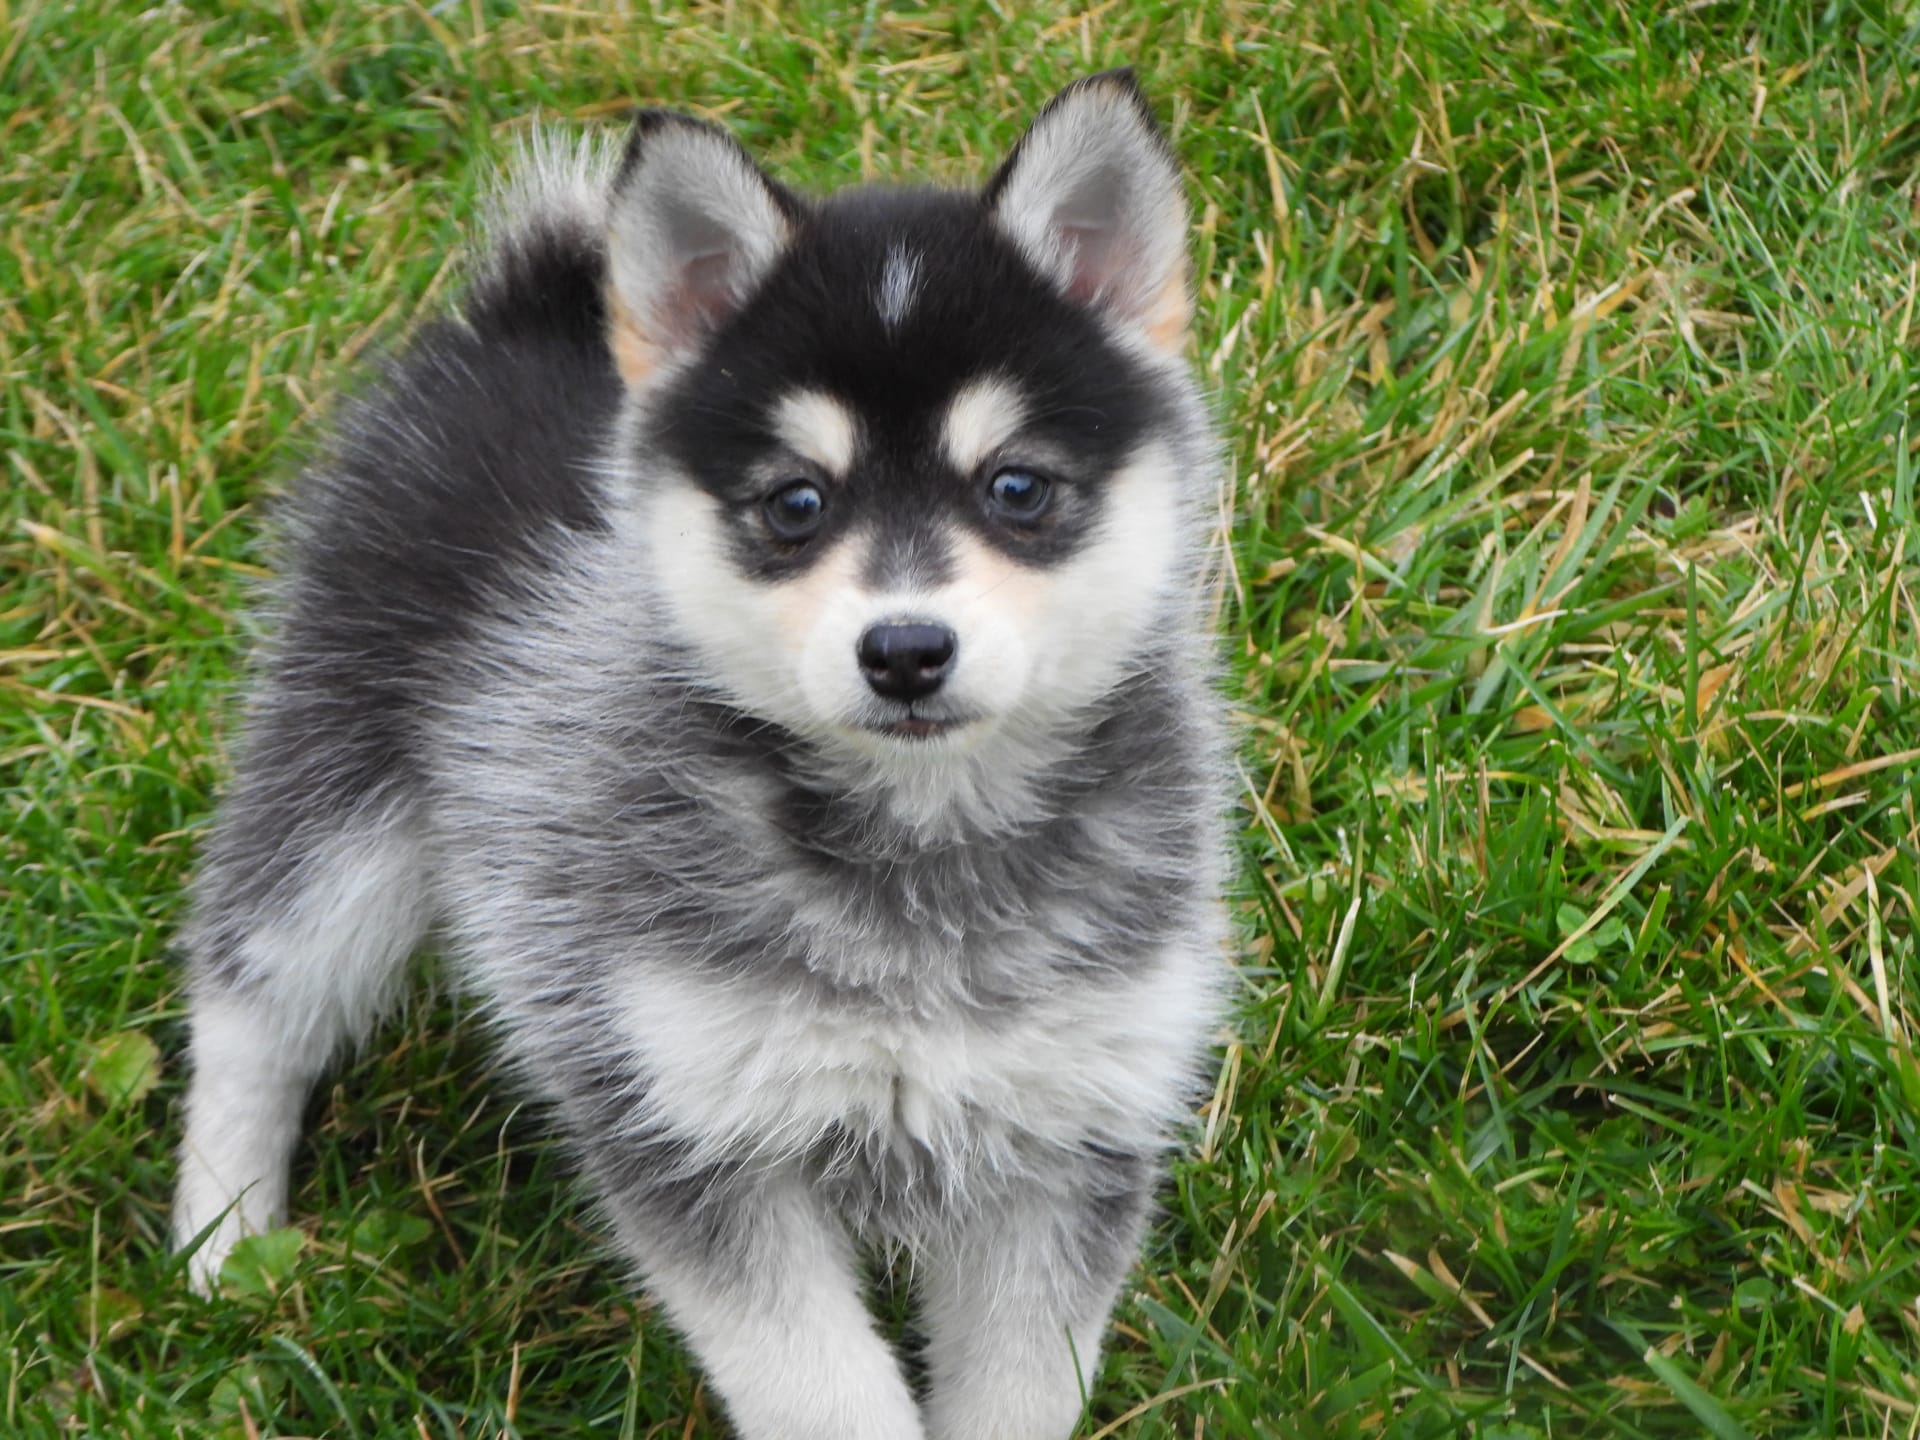 Reed - Pomsky Puppy for Sale in Walhonding, OH | Lancaster Puppies